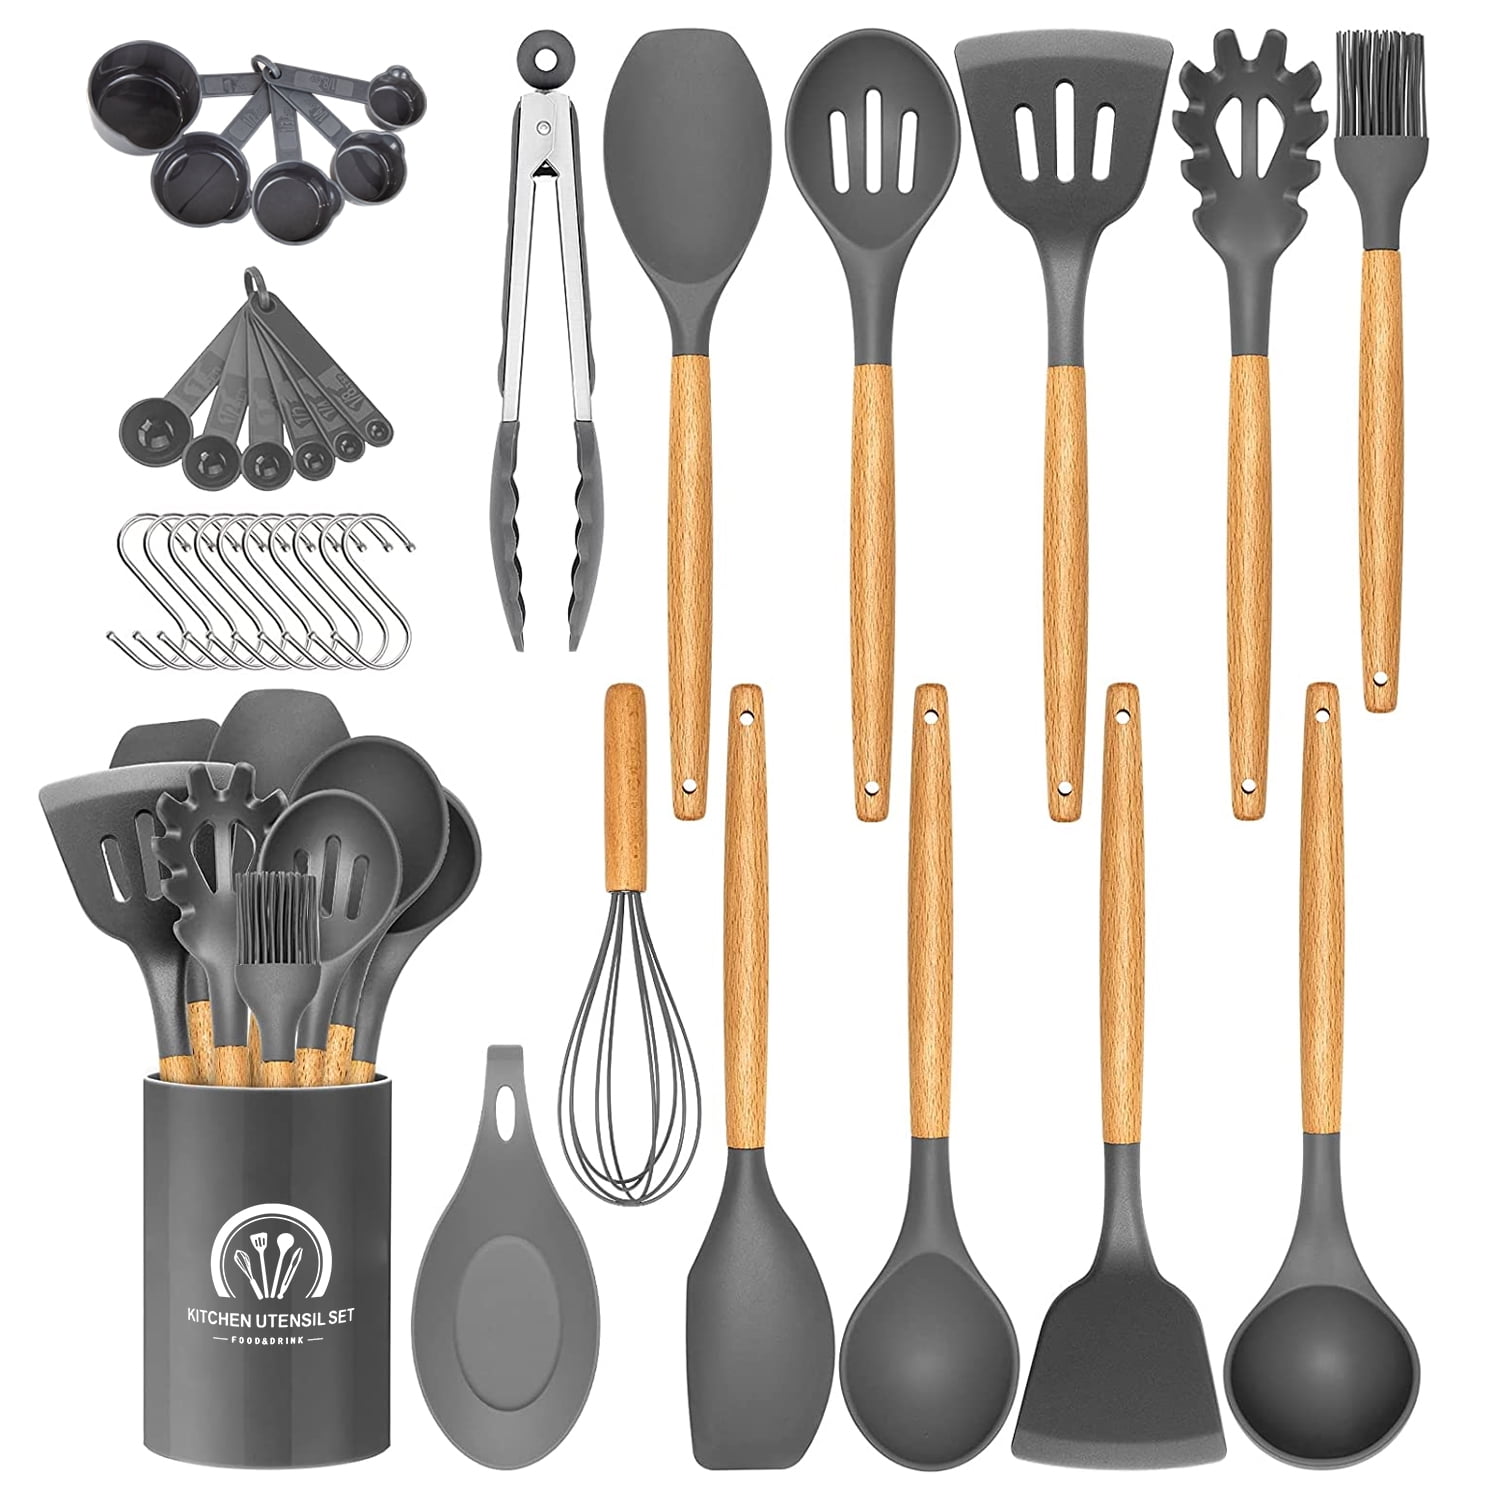 34PCS Silicone Cooking Utensils Set, 446°F Heat Resistant Wooden